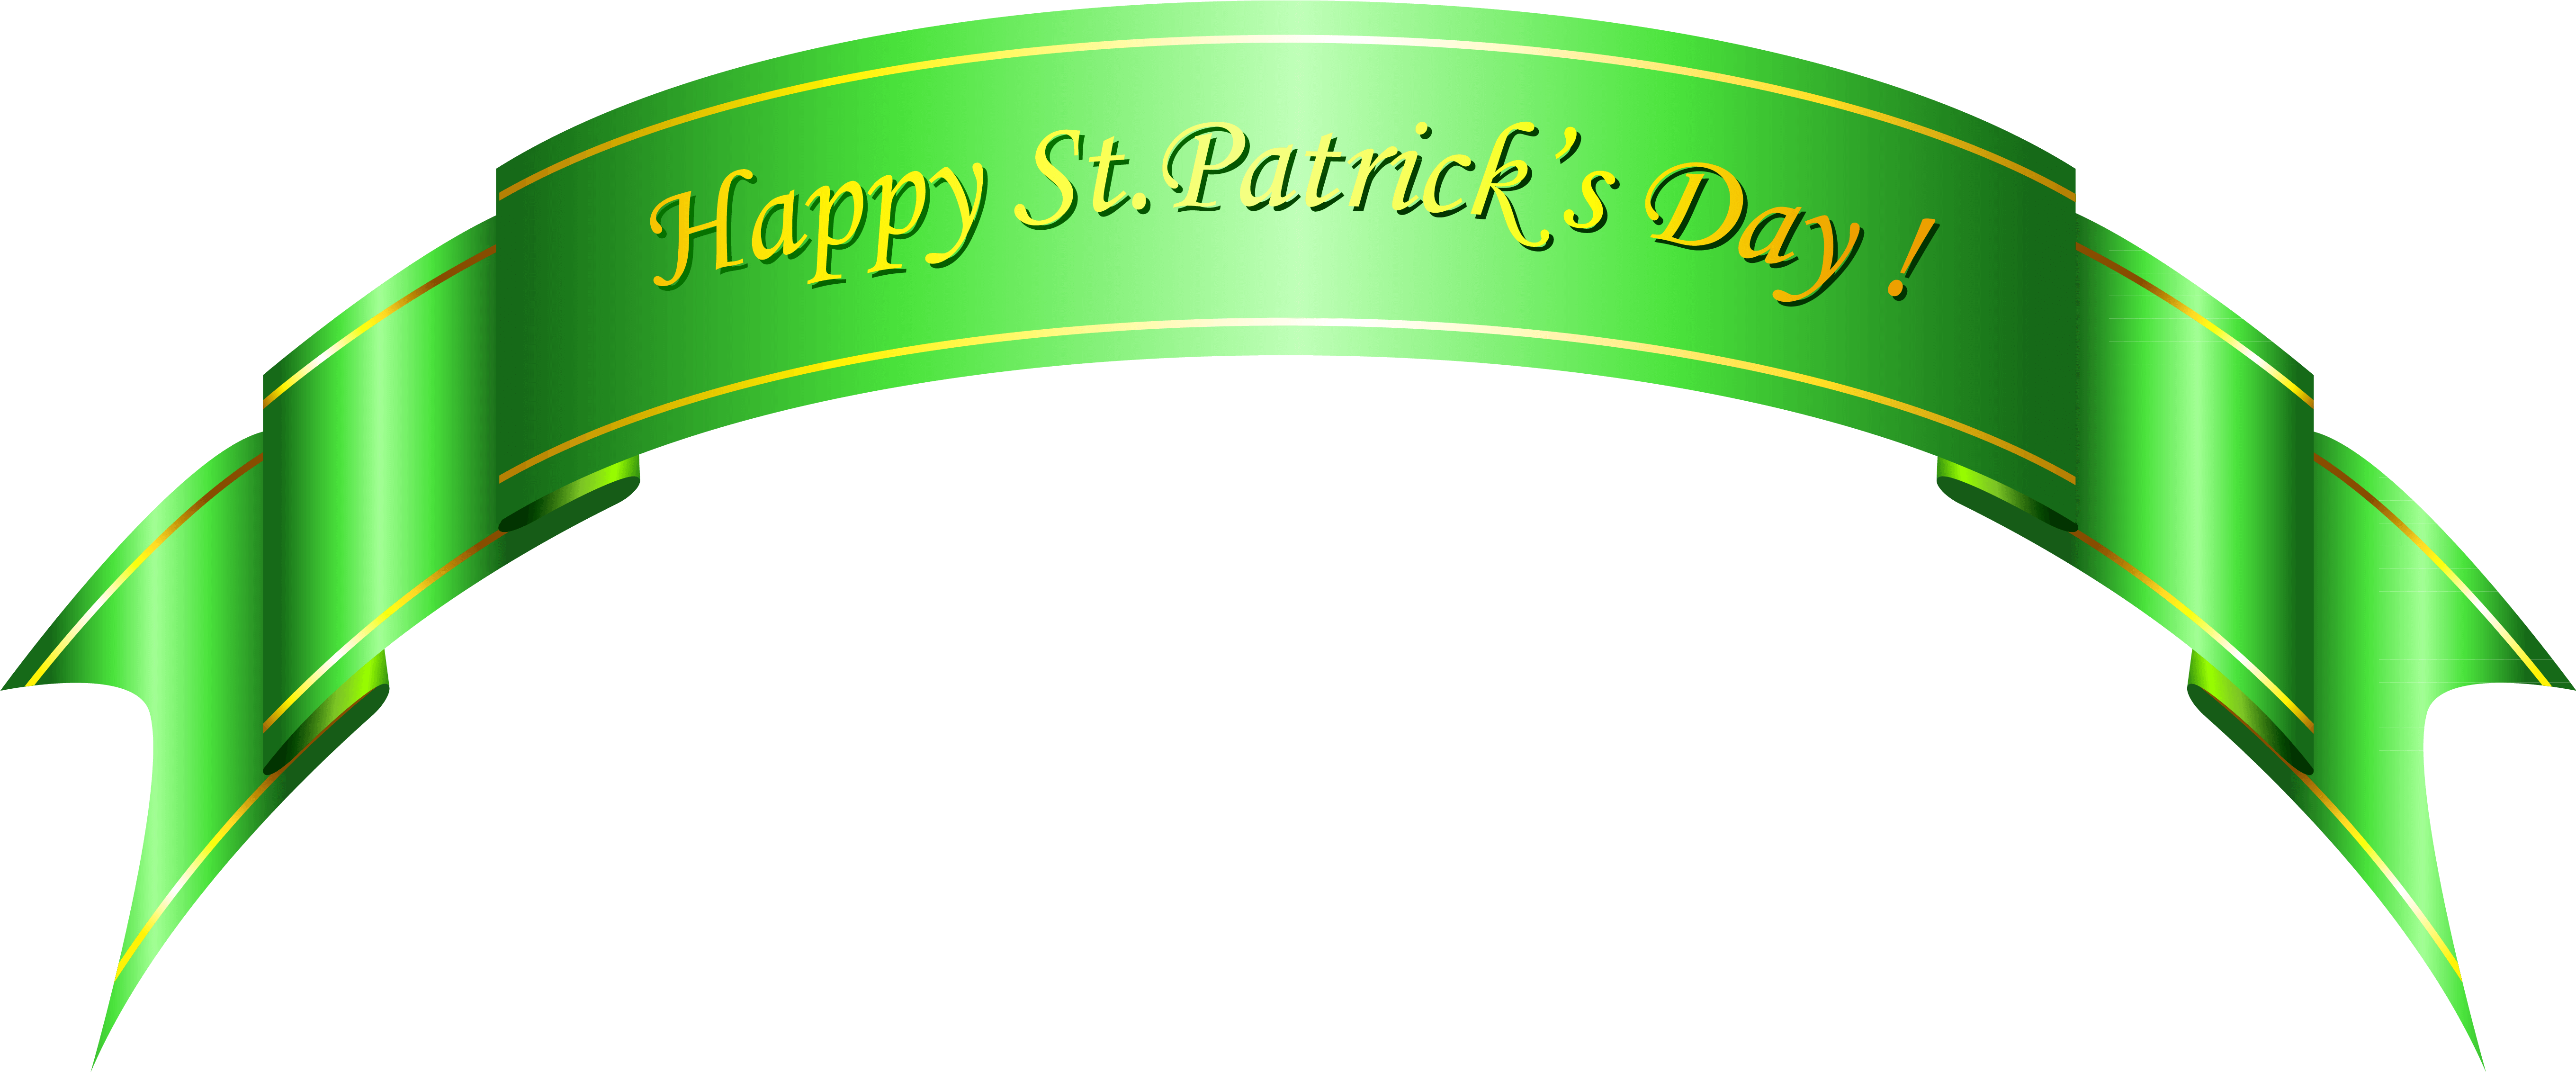 Happy St Patricks Day Png - (5576x2394) Png Clipart Download. 